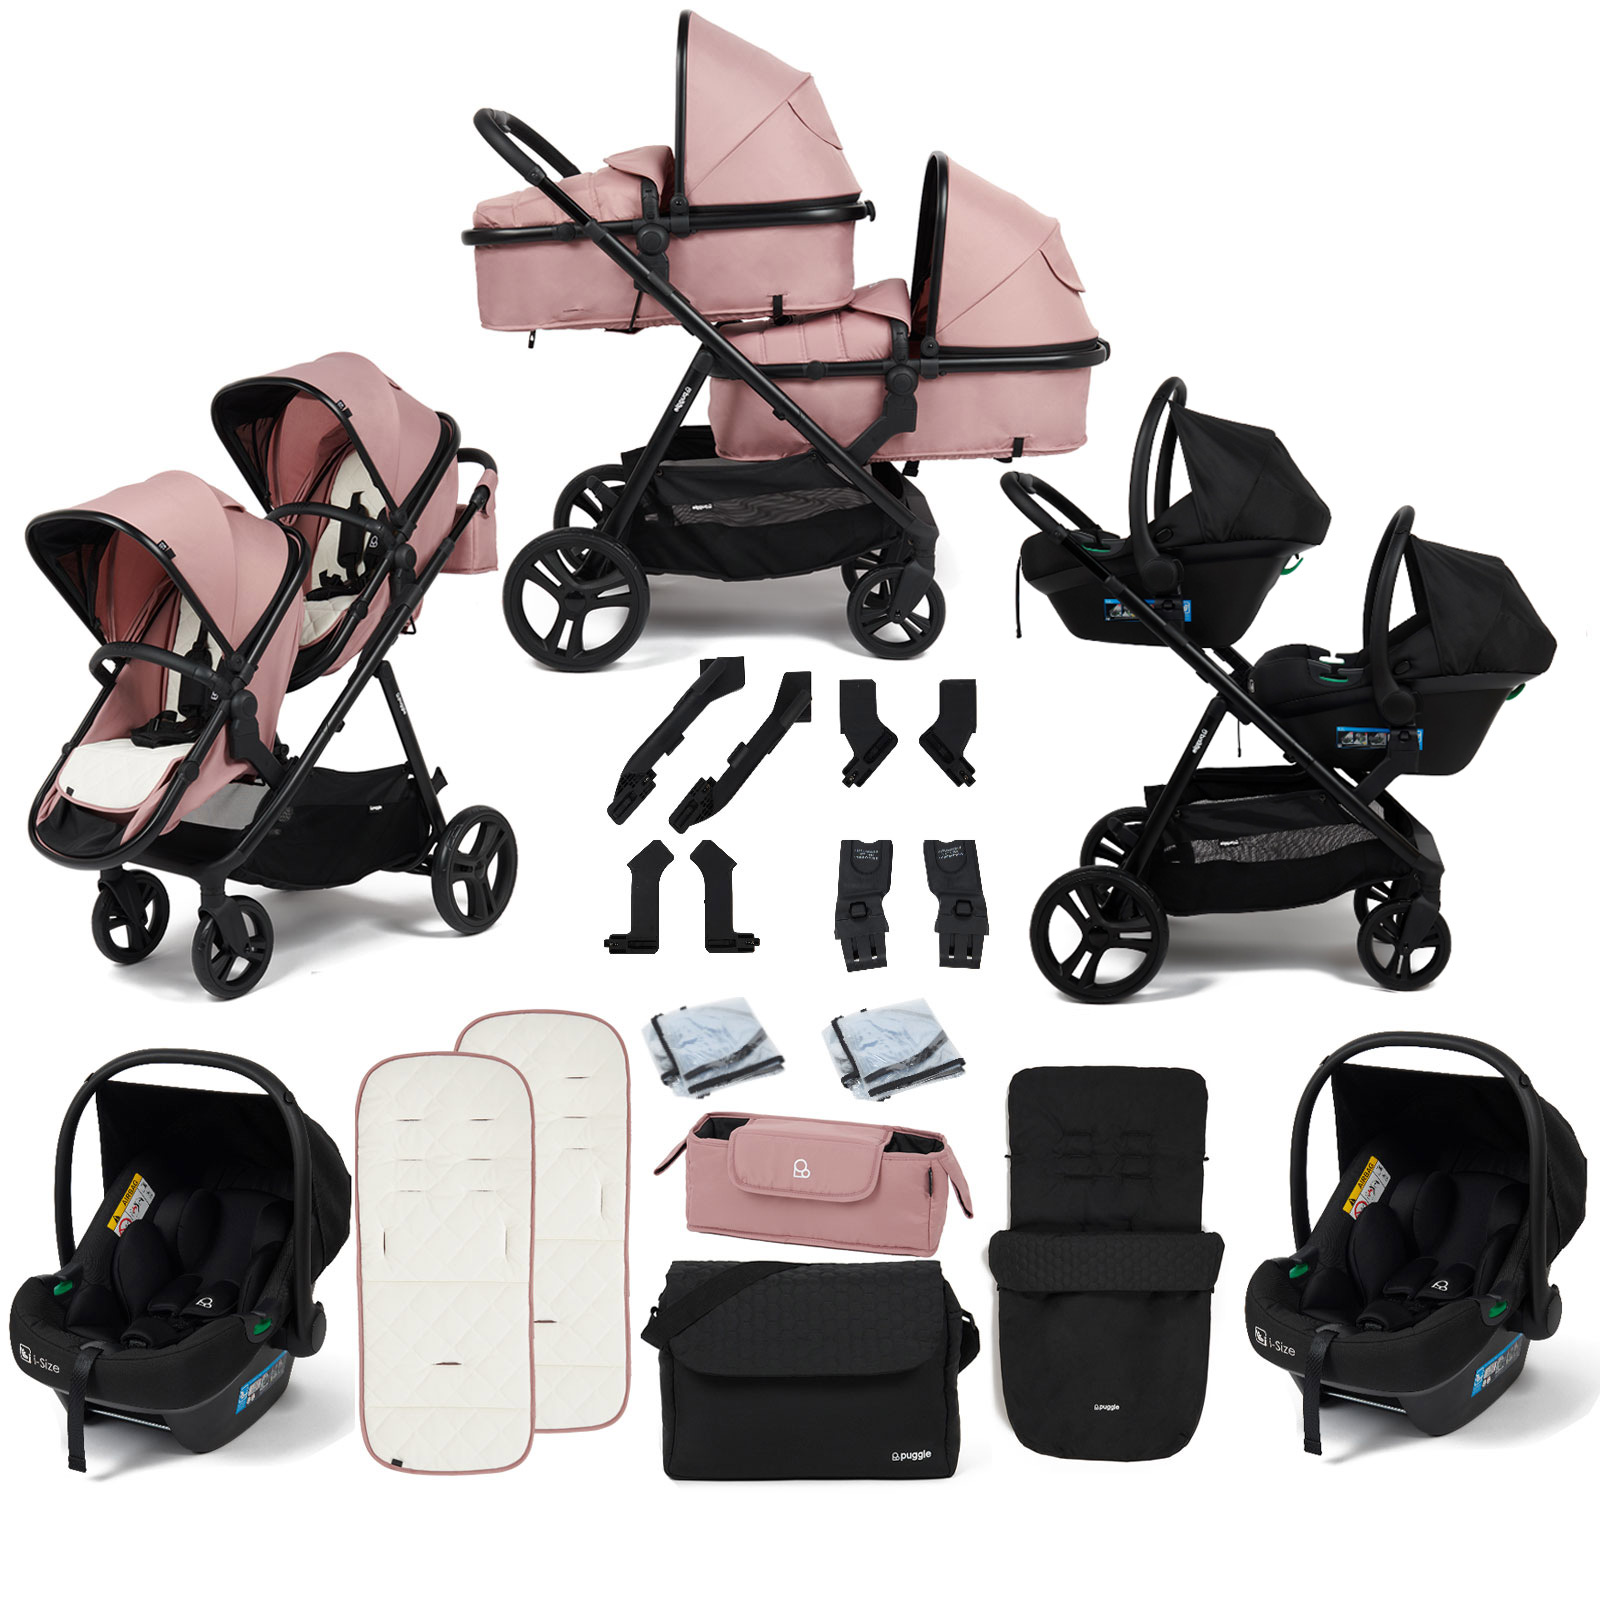 Puggle Memphis 2-in-1 Duo i-Size Double Travel System with 2 Memphis i-Size Car Seats, Footmuff & Bag - Dusk Pink